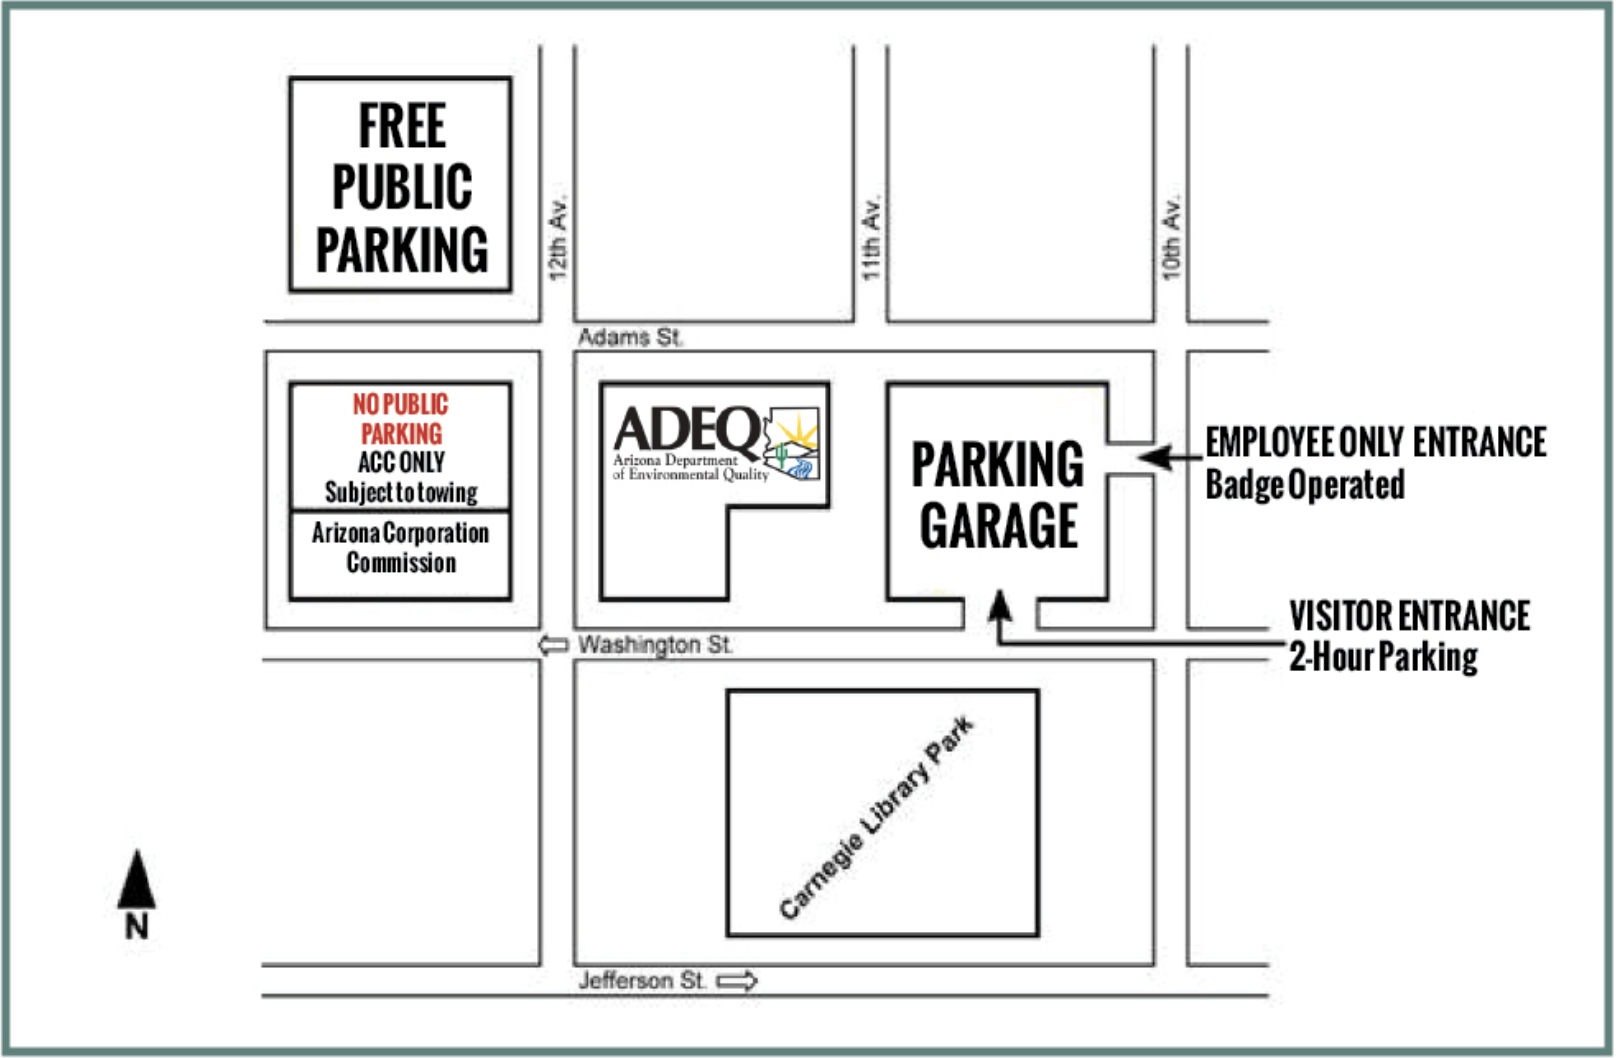 ADEQ Visitor Parking Map 